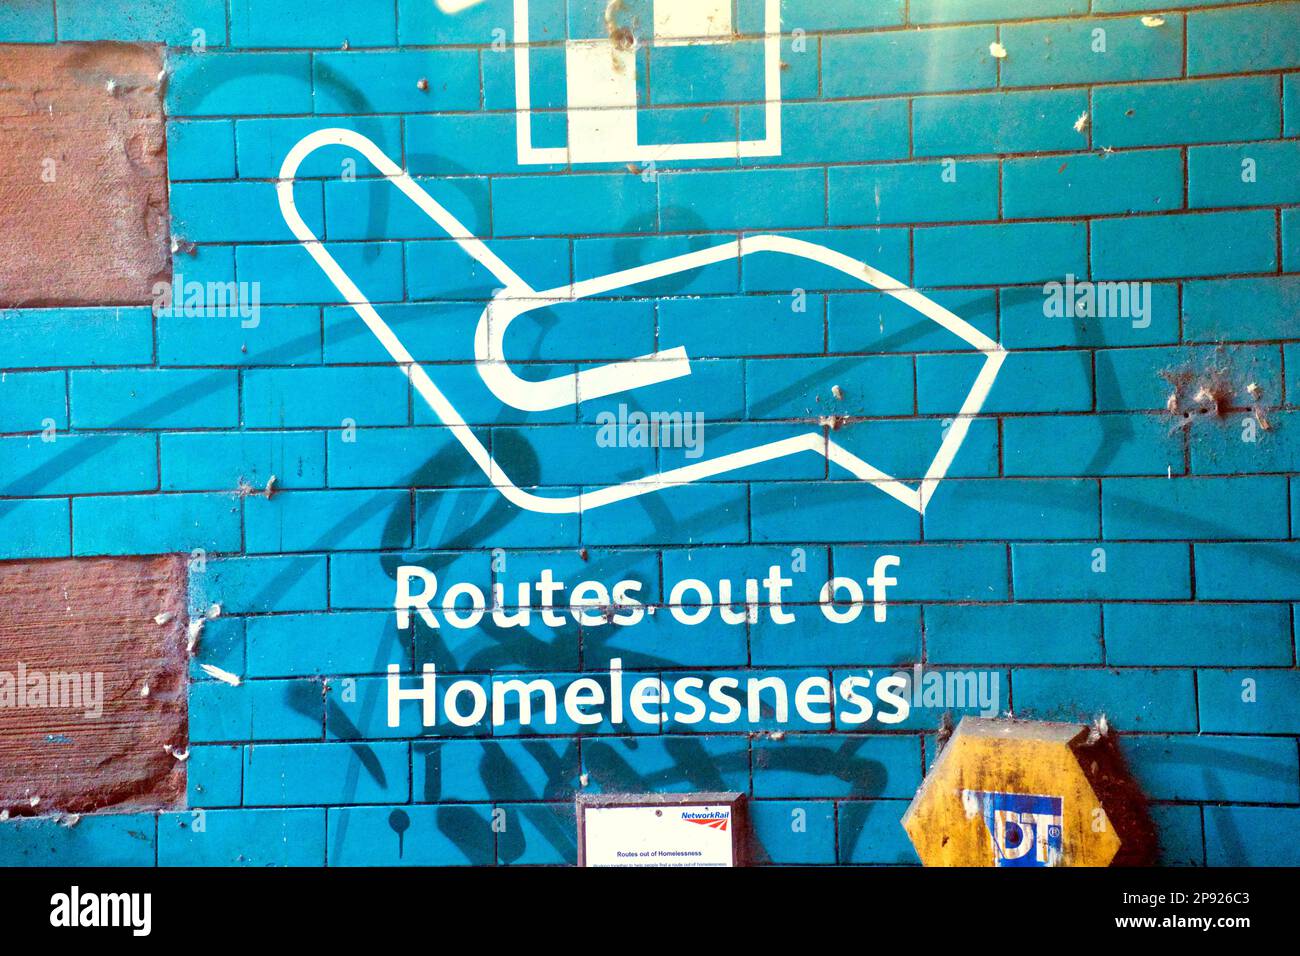 Routes out of homelessness sign on midland street to End youth homelessness Stock Photo